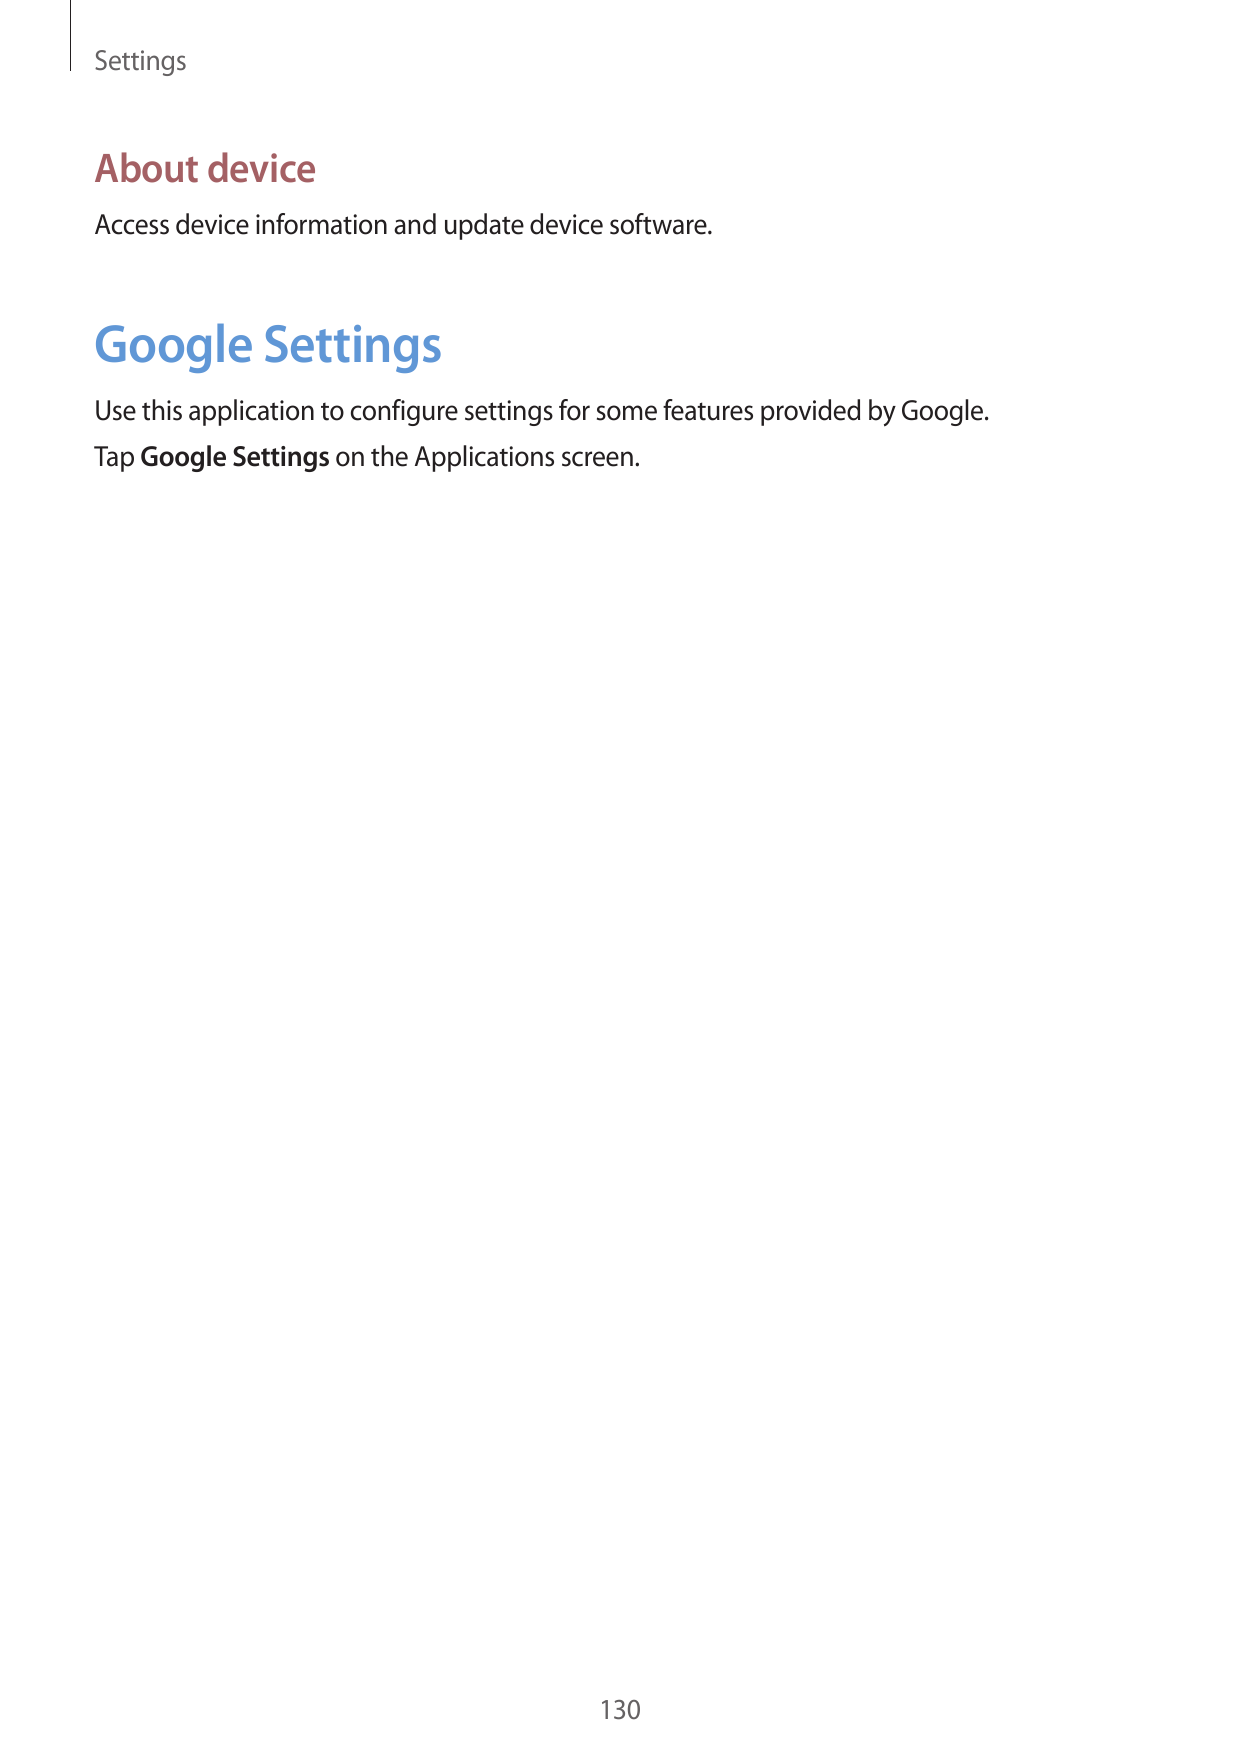 SettingsAbout deviceAccess device information and update device software.Google SettingsUse this application to configure settin